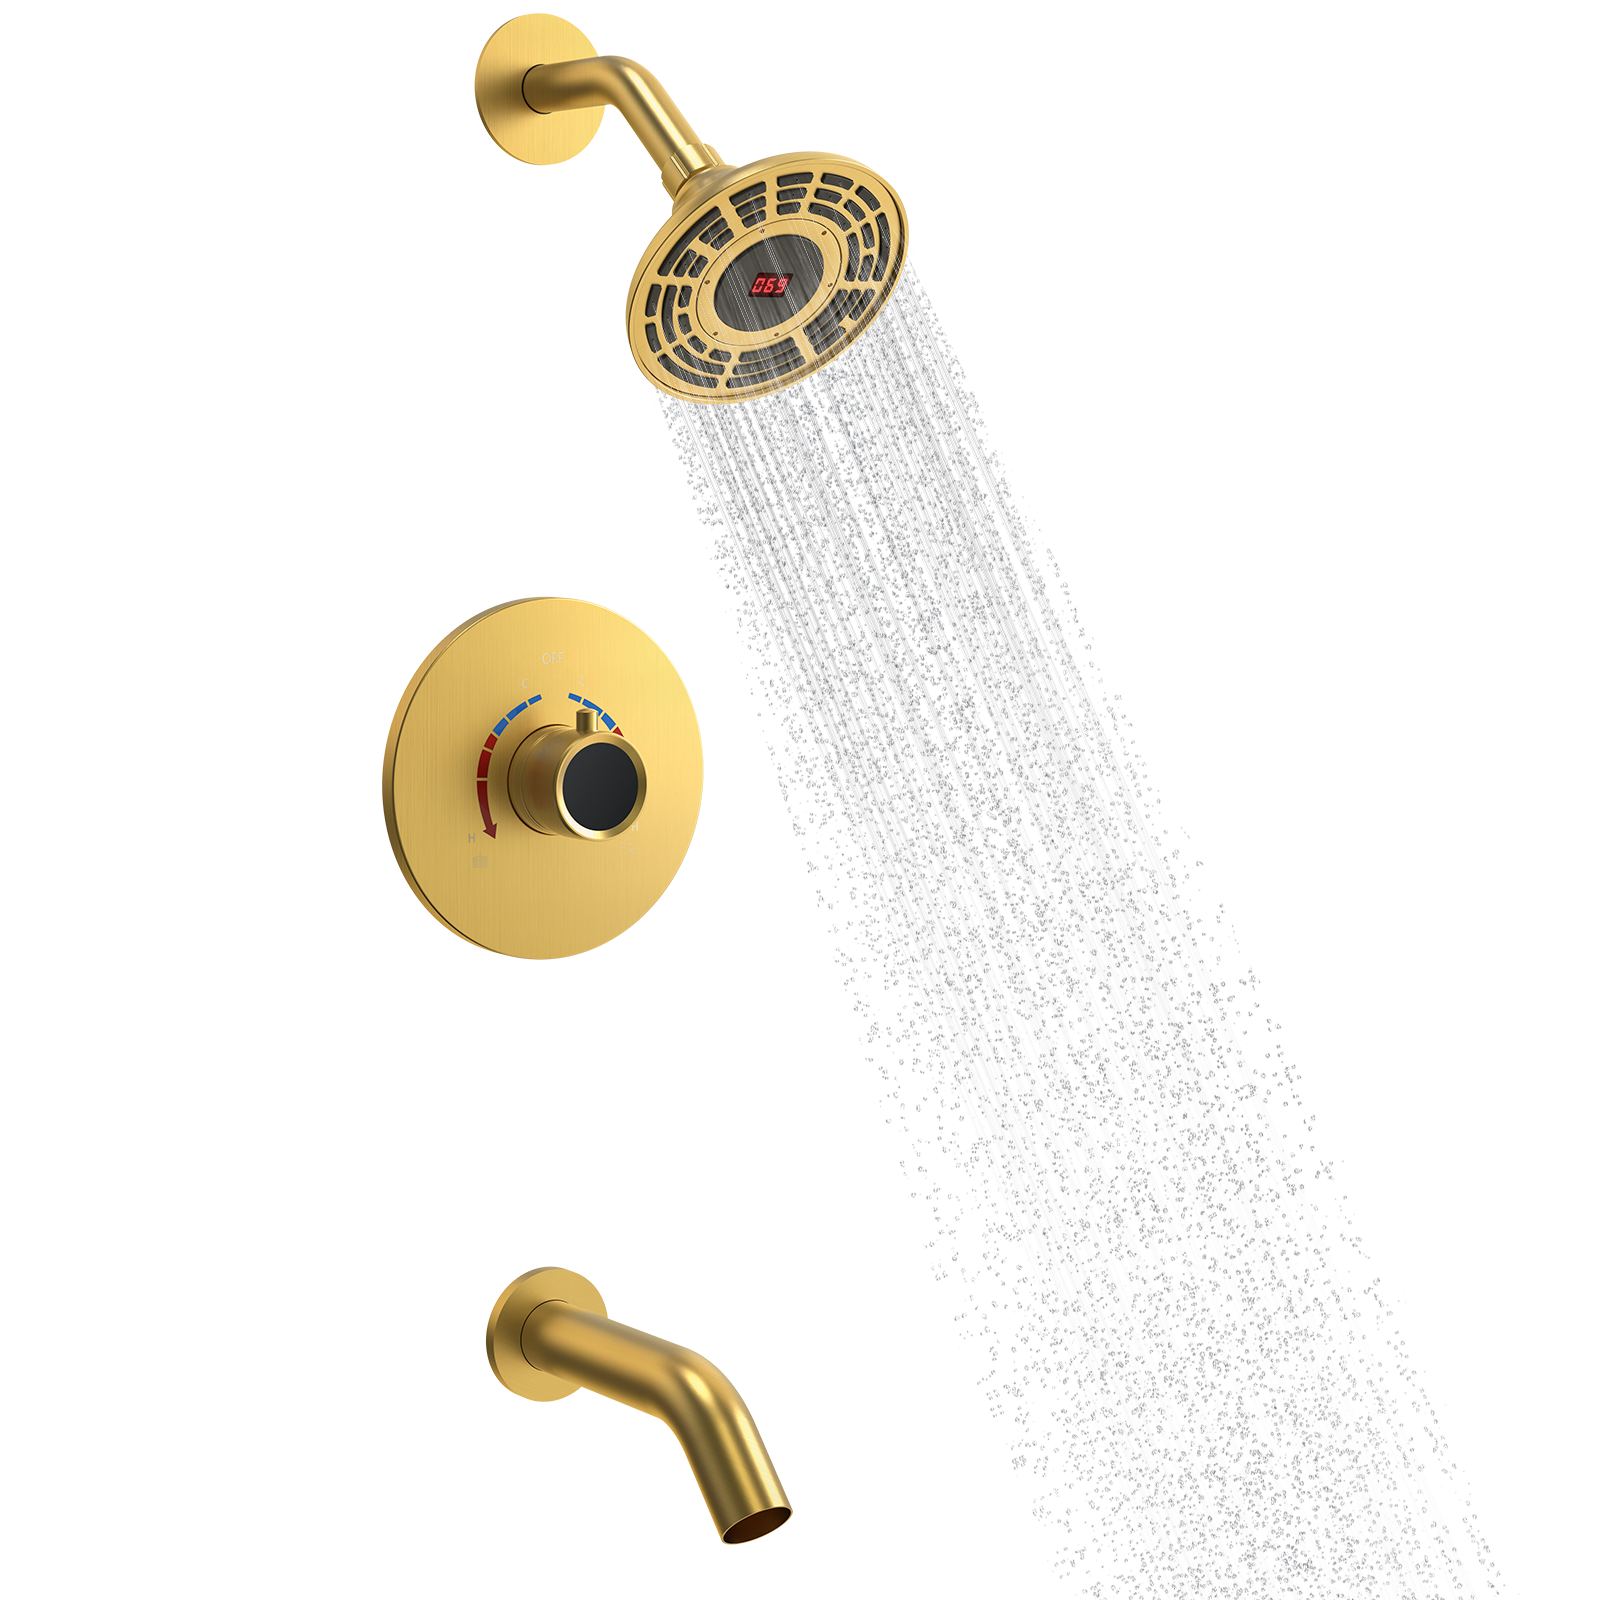 SFS-1018-GD5 EVERSTEIN Digital display constant temperature shower faucet with rough valve in Brushed Gold